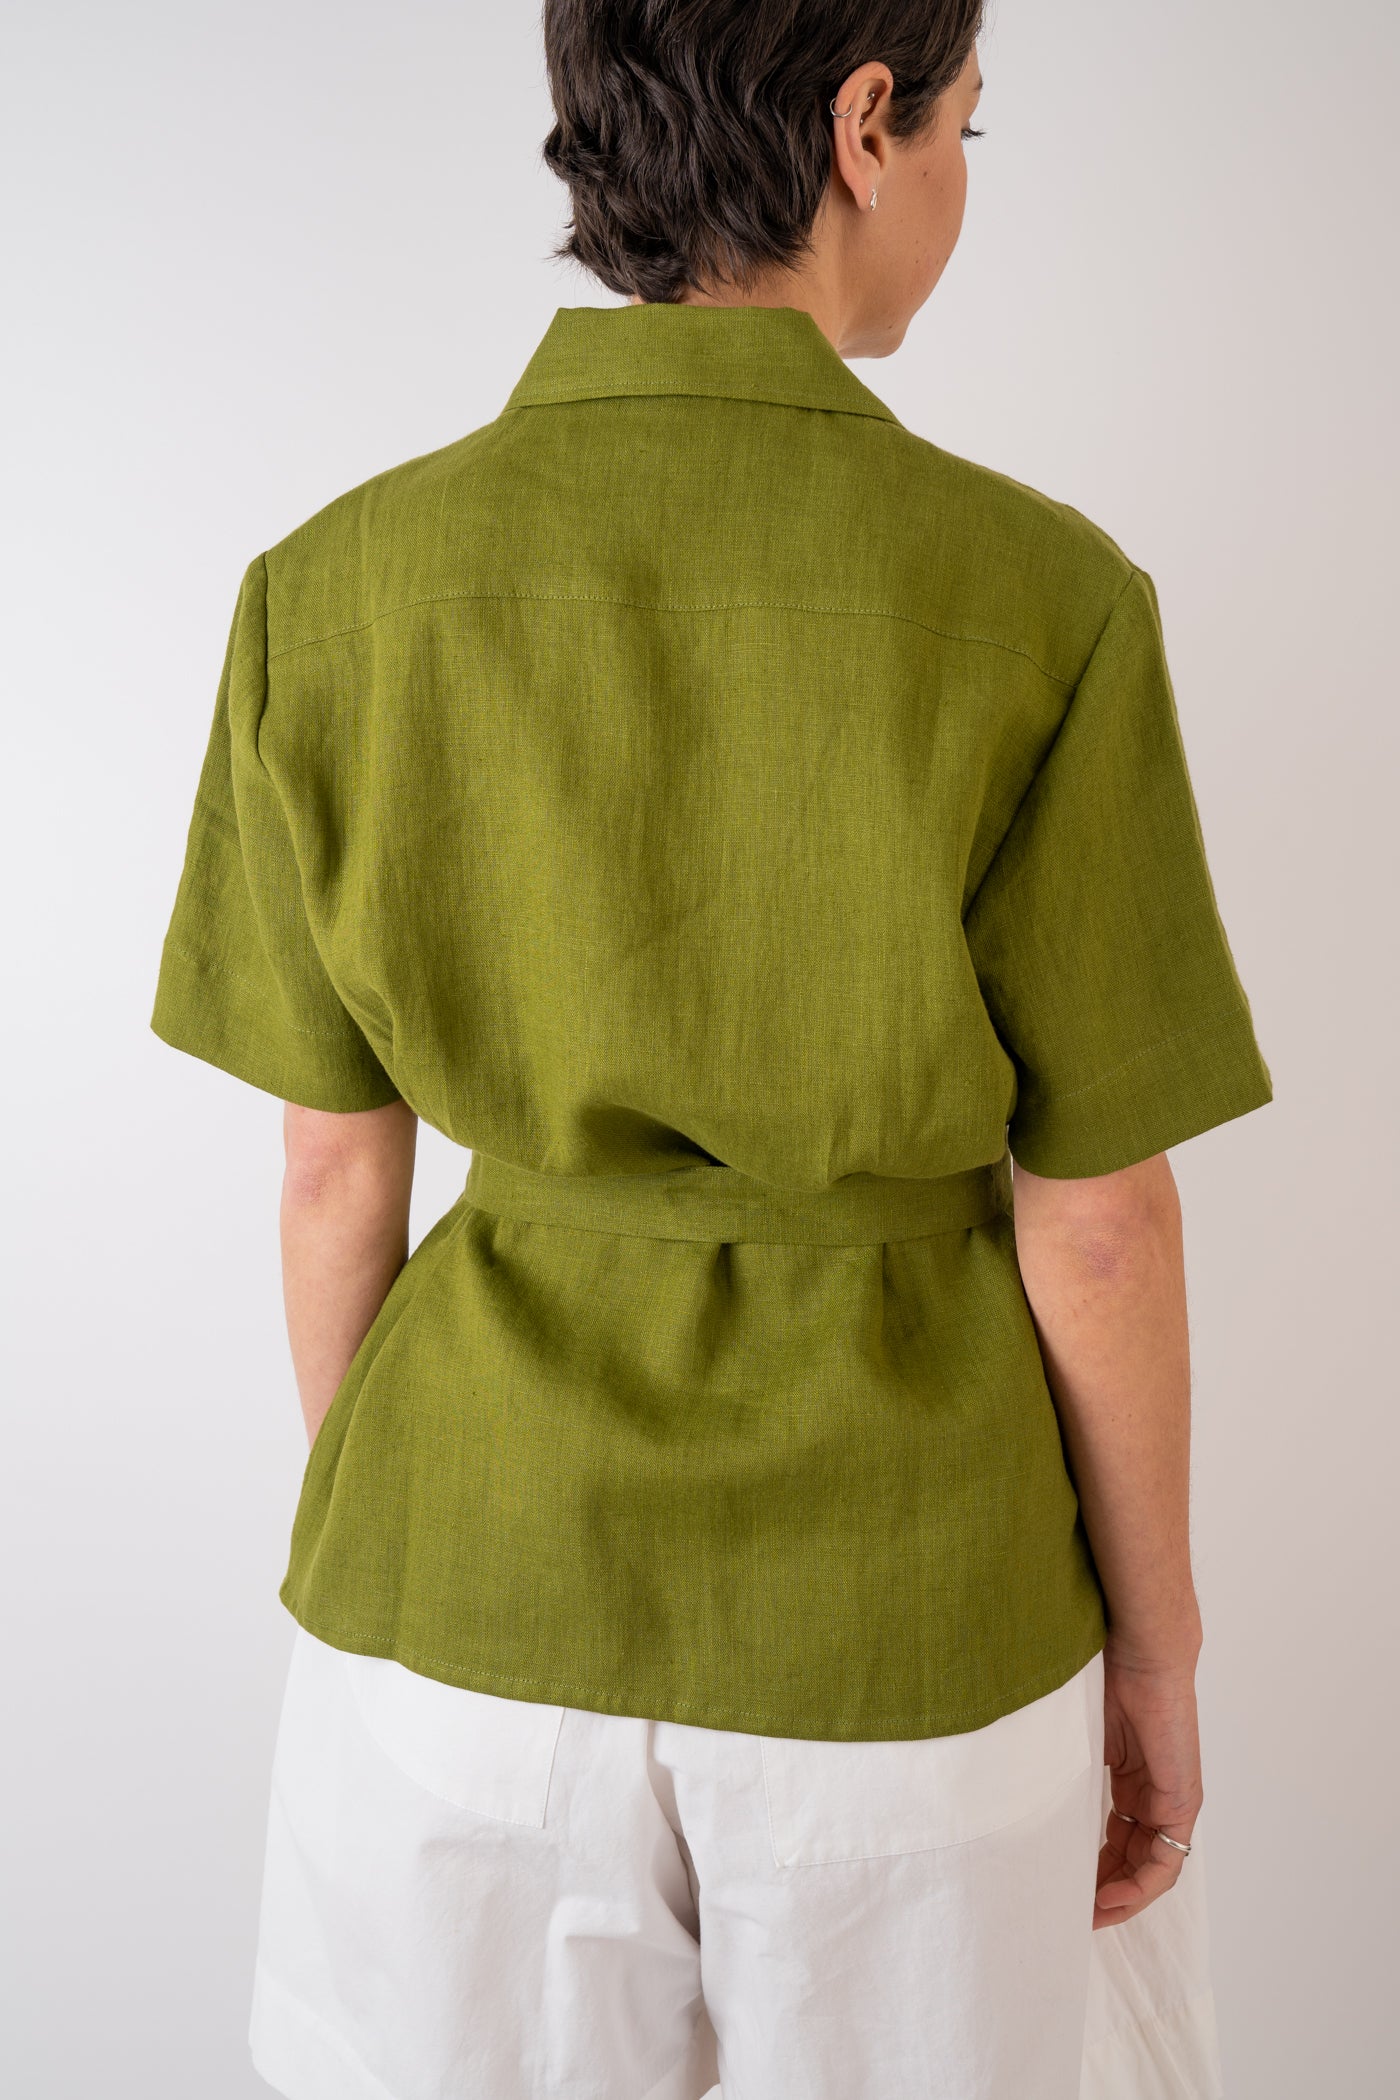 Xi Atelier Linen Cleo Shirt in green with tie at the waist